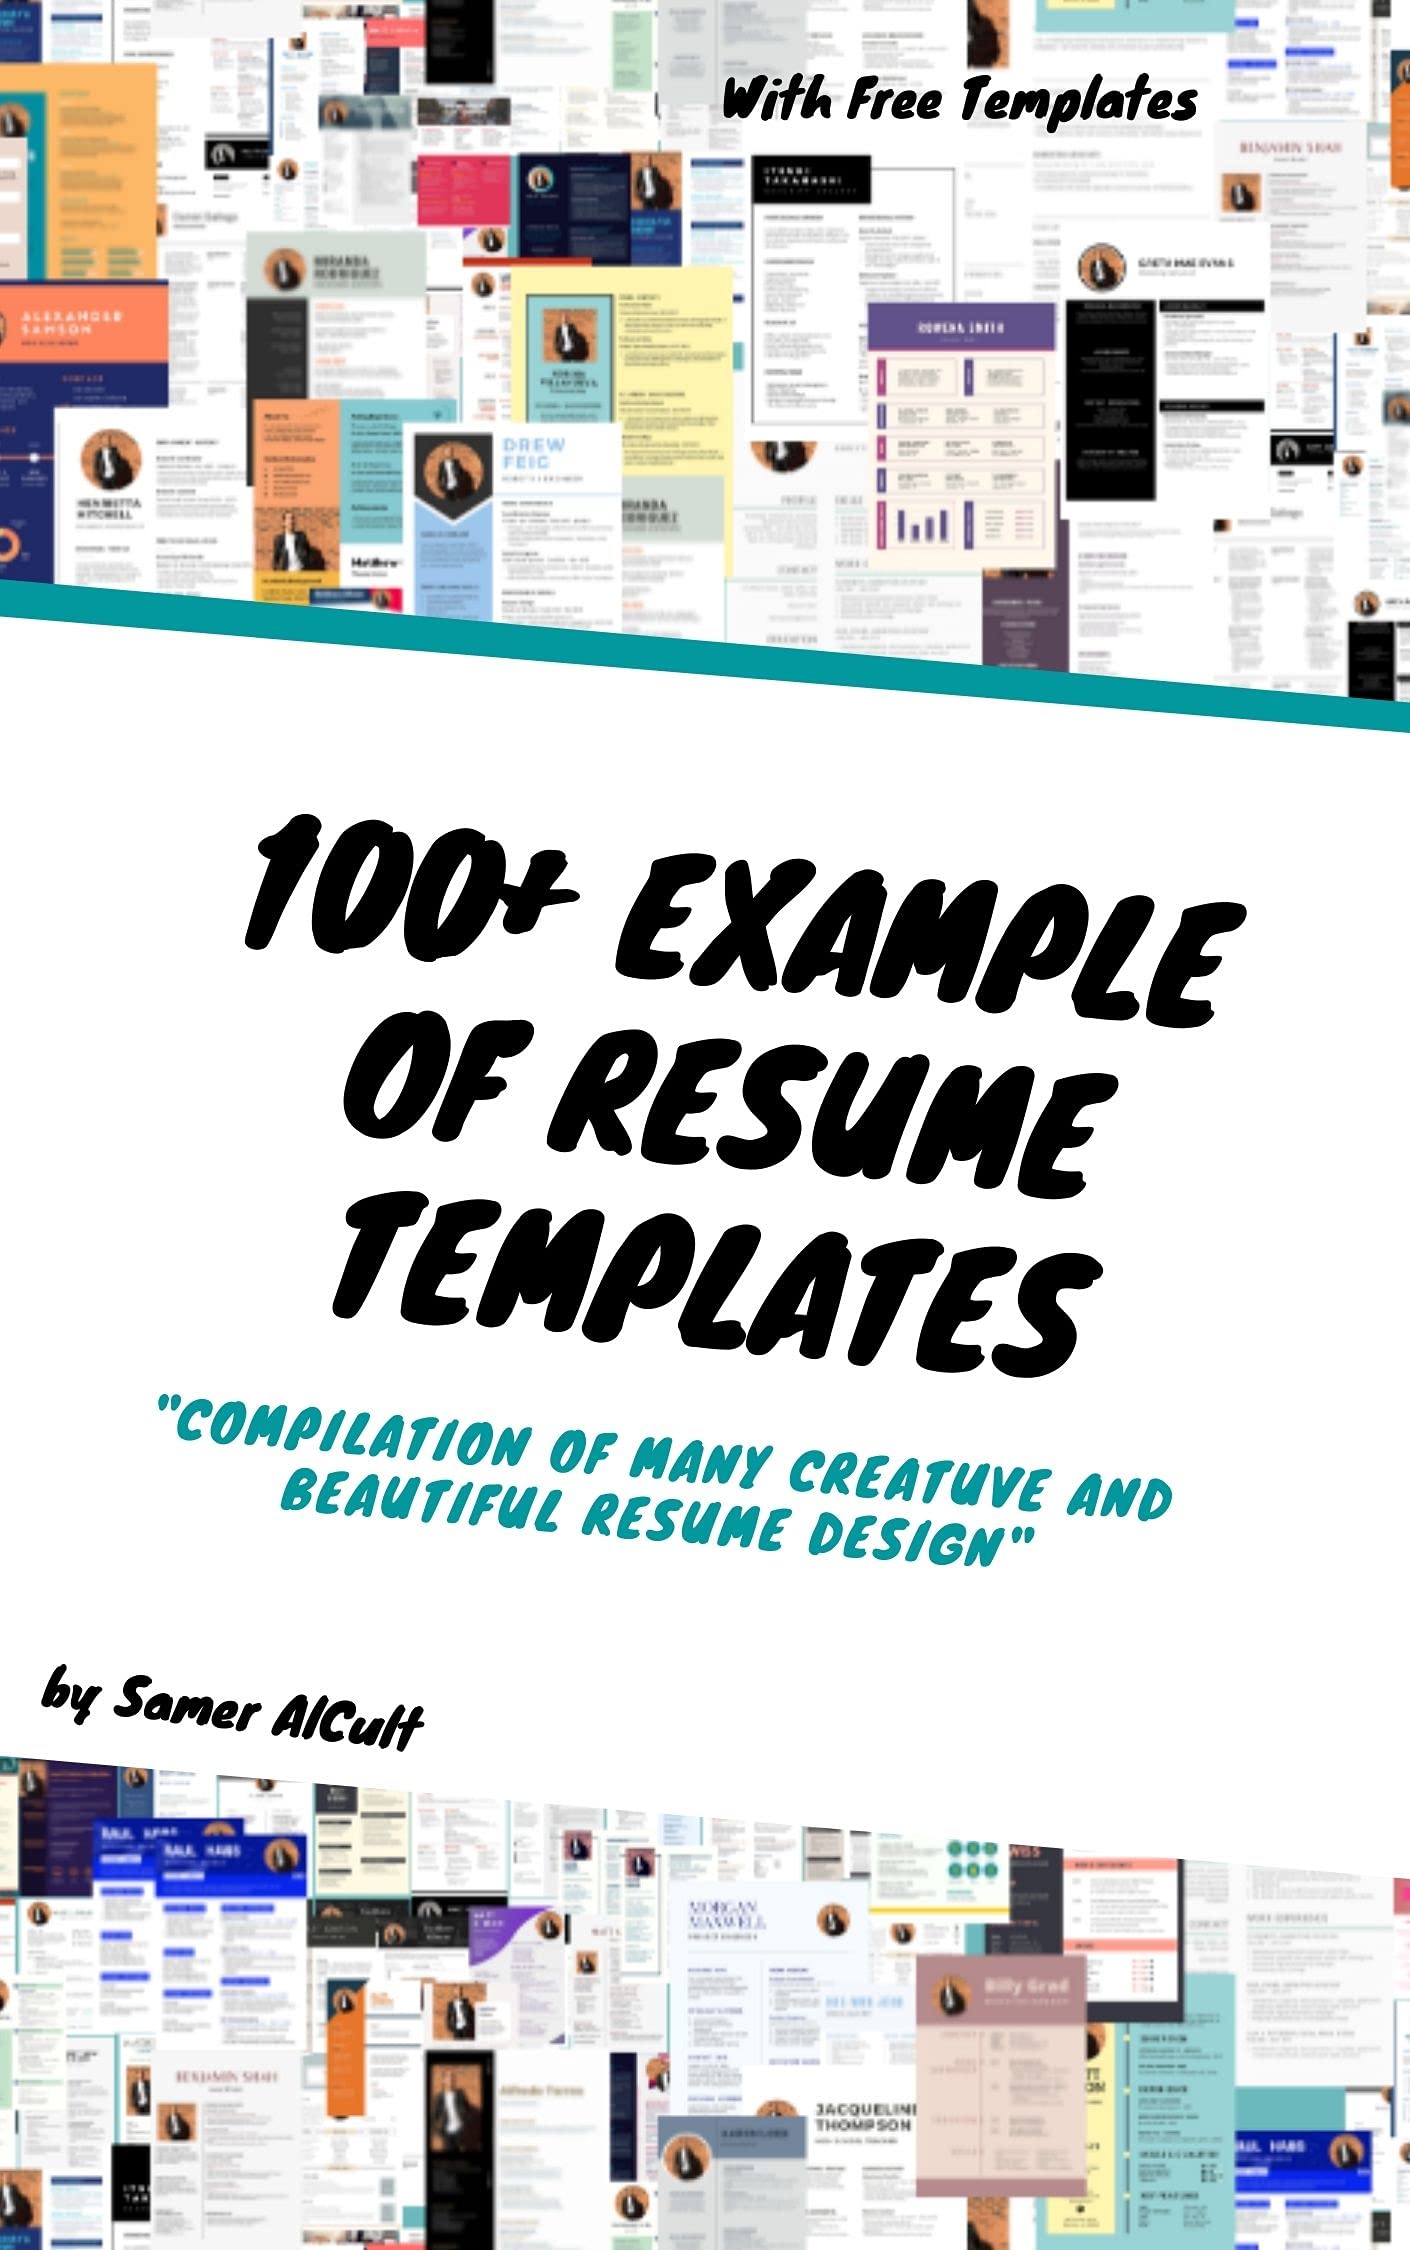 100+ Example of Resume Templates: Compilation of Many Creative and Beautiful Resume Design (Design Templates Book 1)